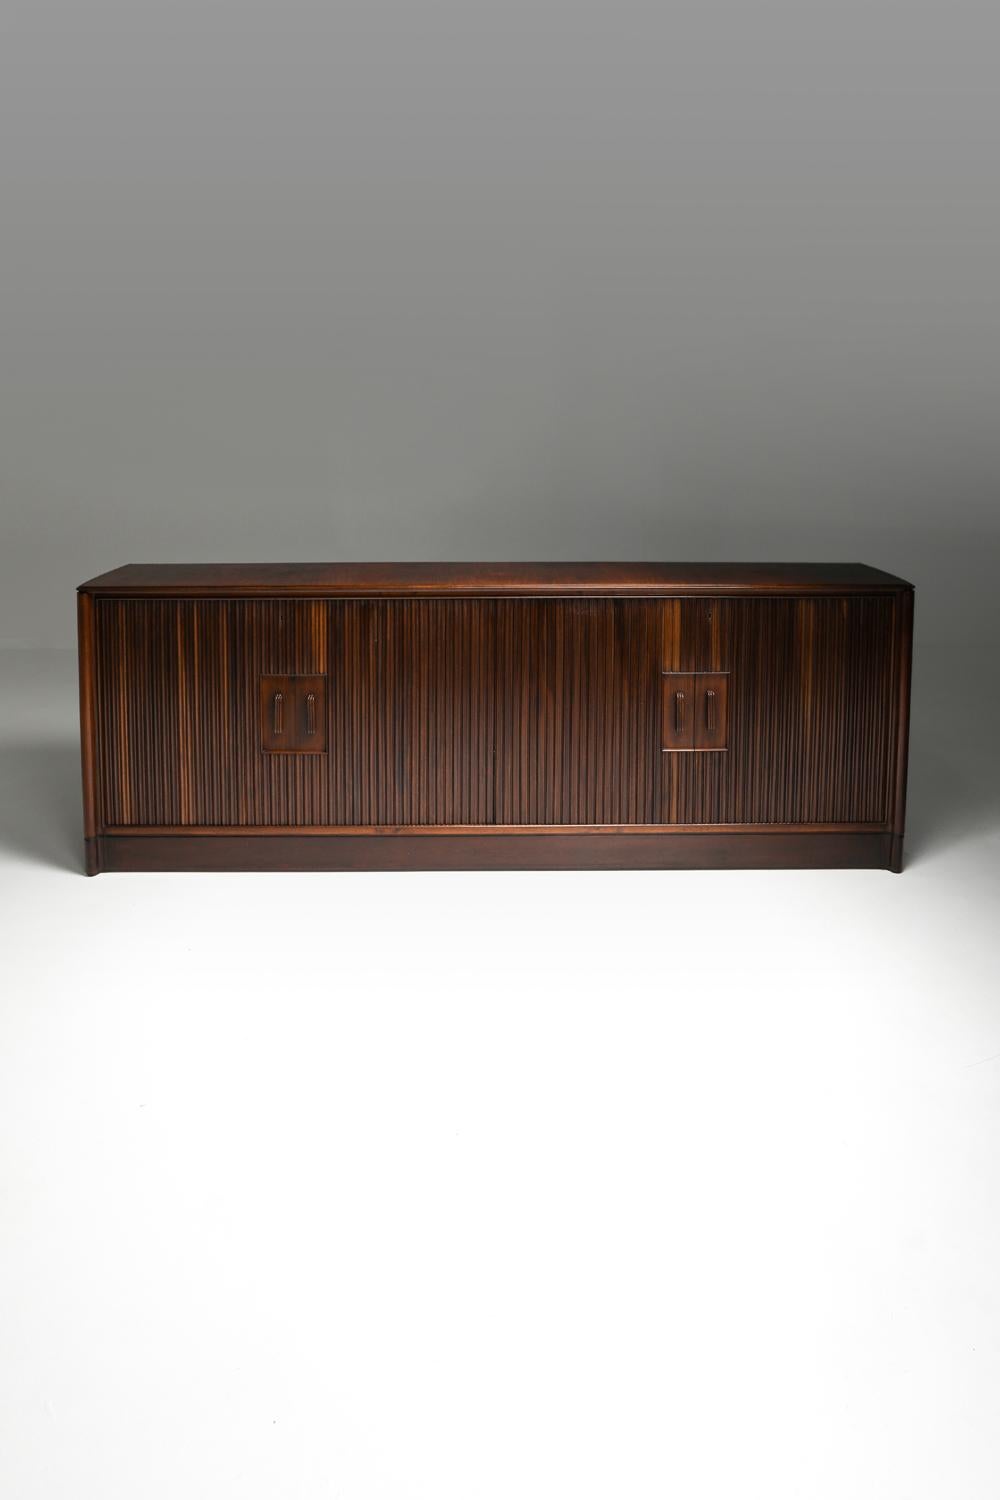 Osvaldo Borsani and Lucio Fontana credenza, Italy, circa 1950

Quite a Minimalist item for its midcentury era.
Luxury and high quality storage piece by one of Italy's greatest.
Beautiful variations in color of the wood grain.

We've presented